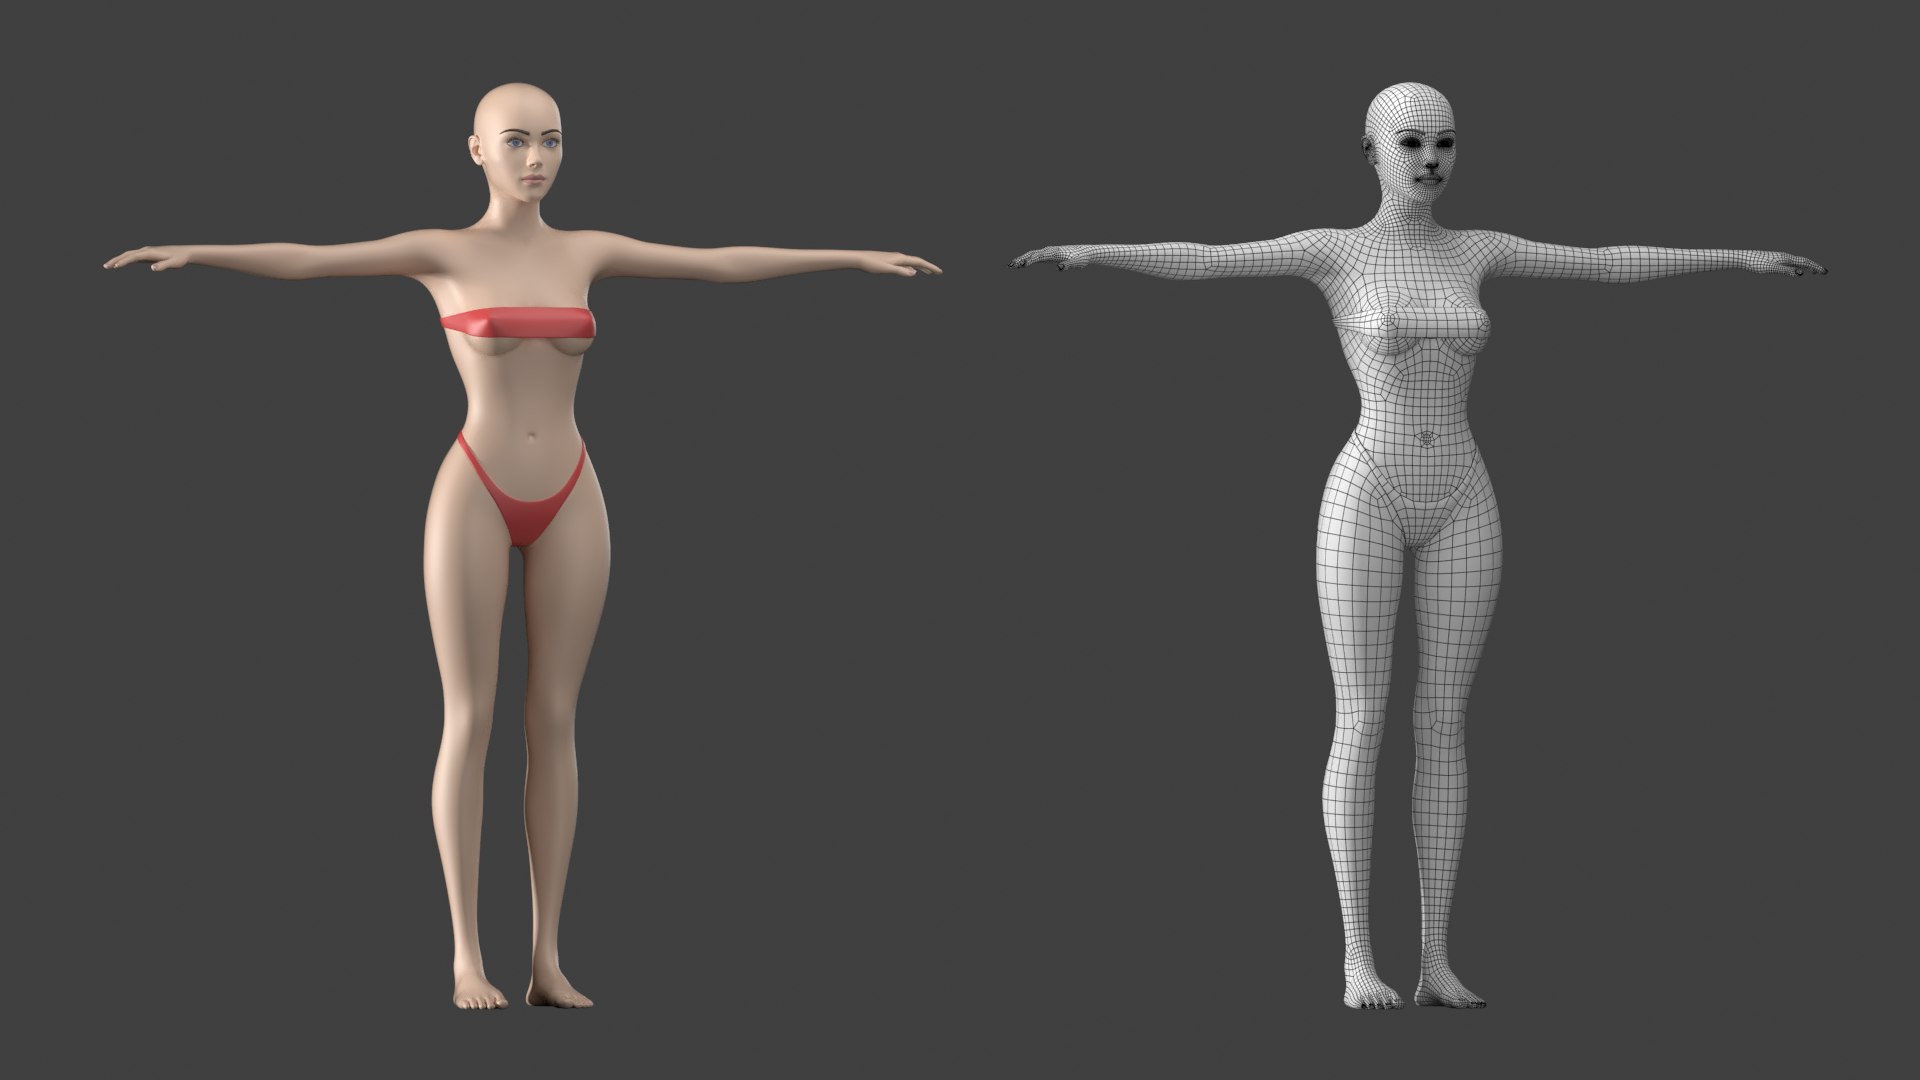 Why is the 'T-Pose' the default pose used when animating 3D models